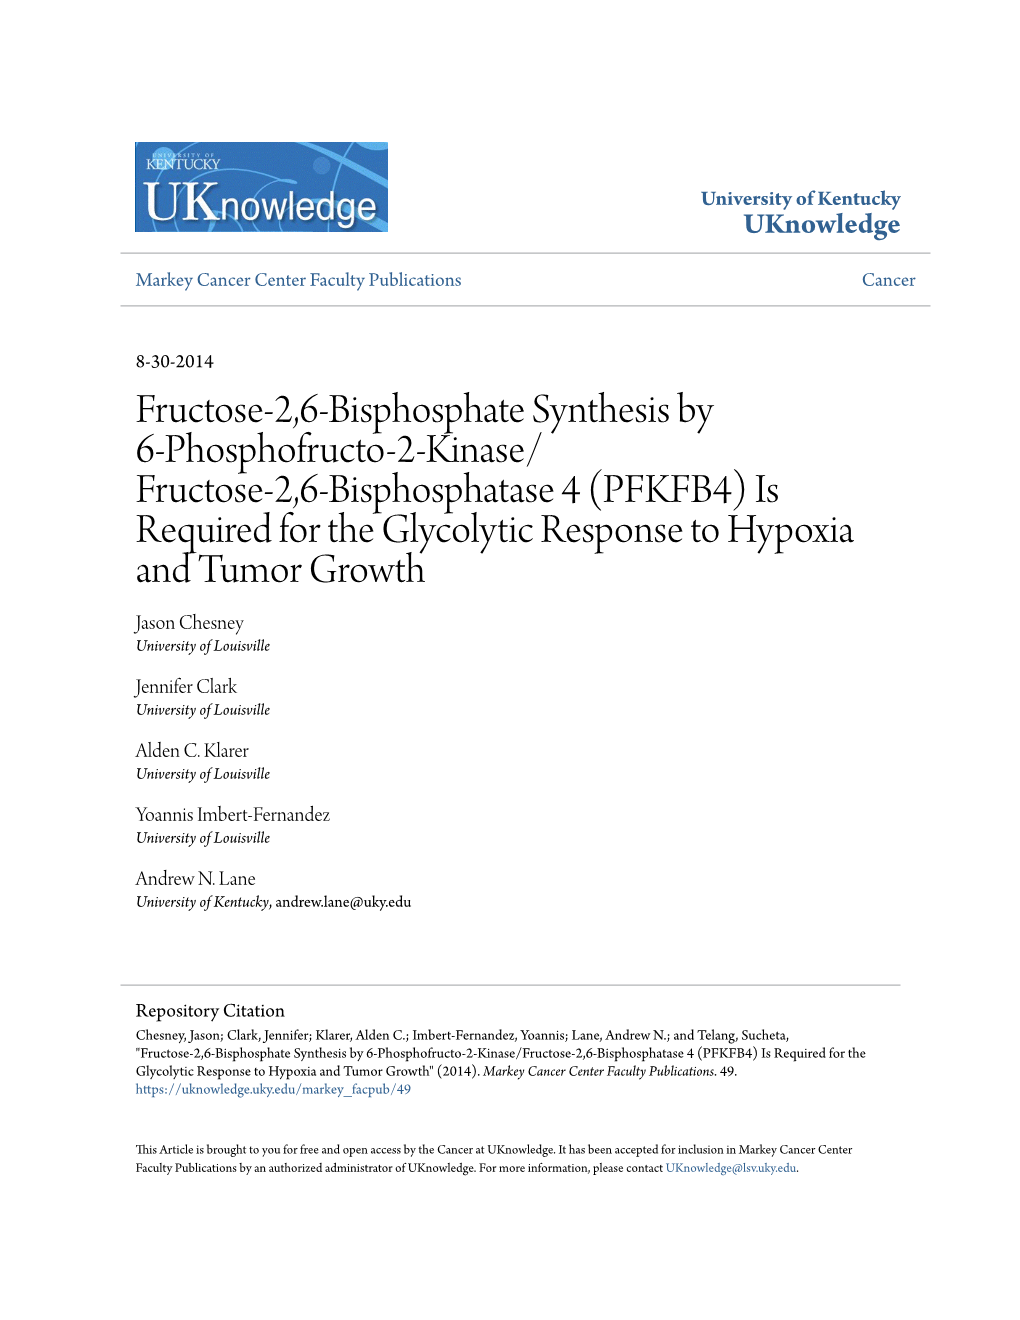 Fructose-2,6-Bisphosphate Synthesis by 6-Phosphofructo-2-Kinase